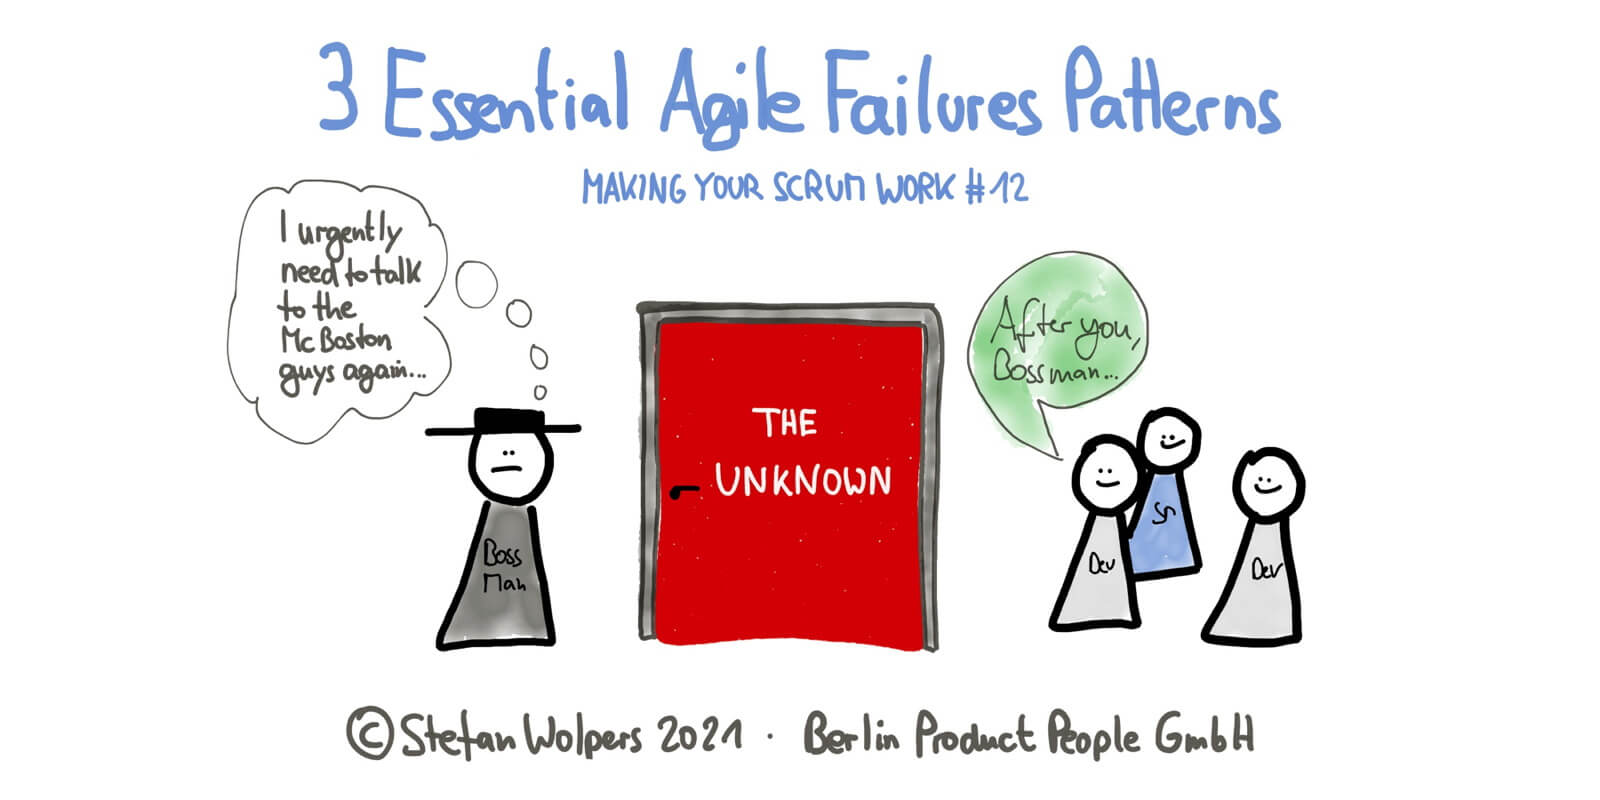 Three Essential Agile Failure Patterns in 7:31 Minutes—Making Your Scrum Work #12 — Berlin Product People GmbH